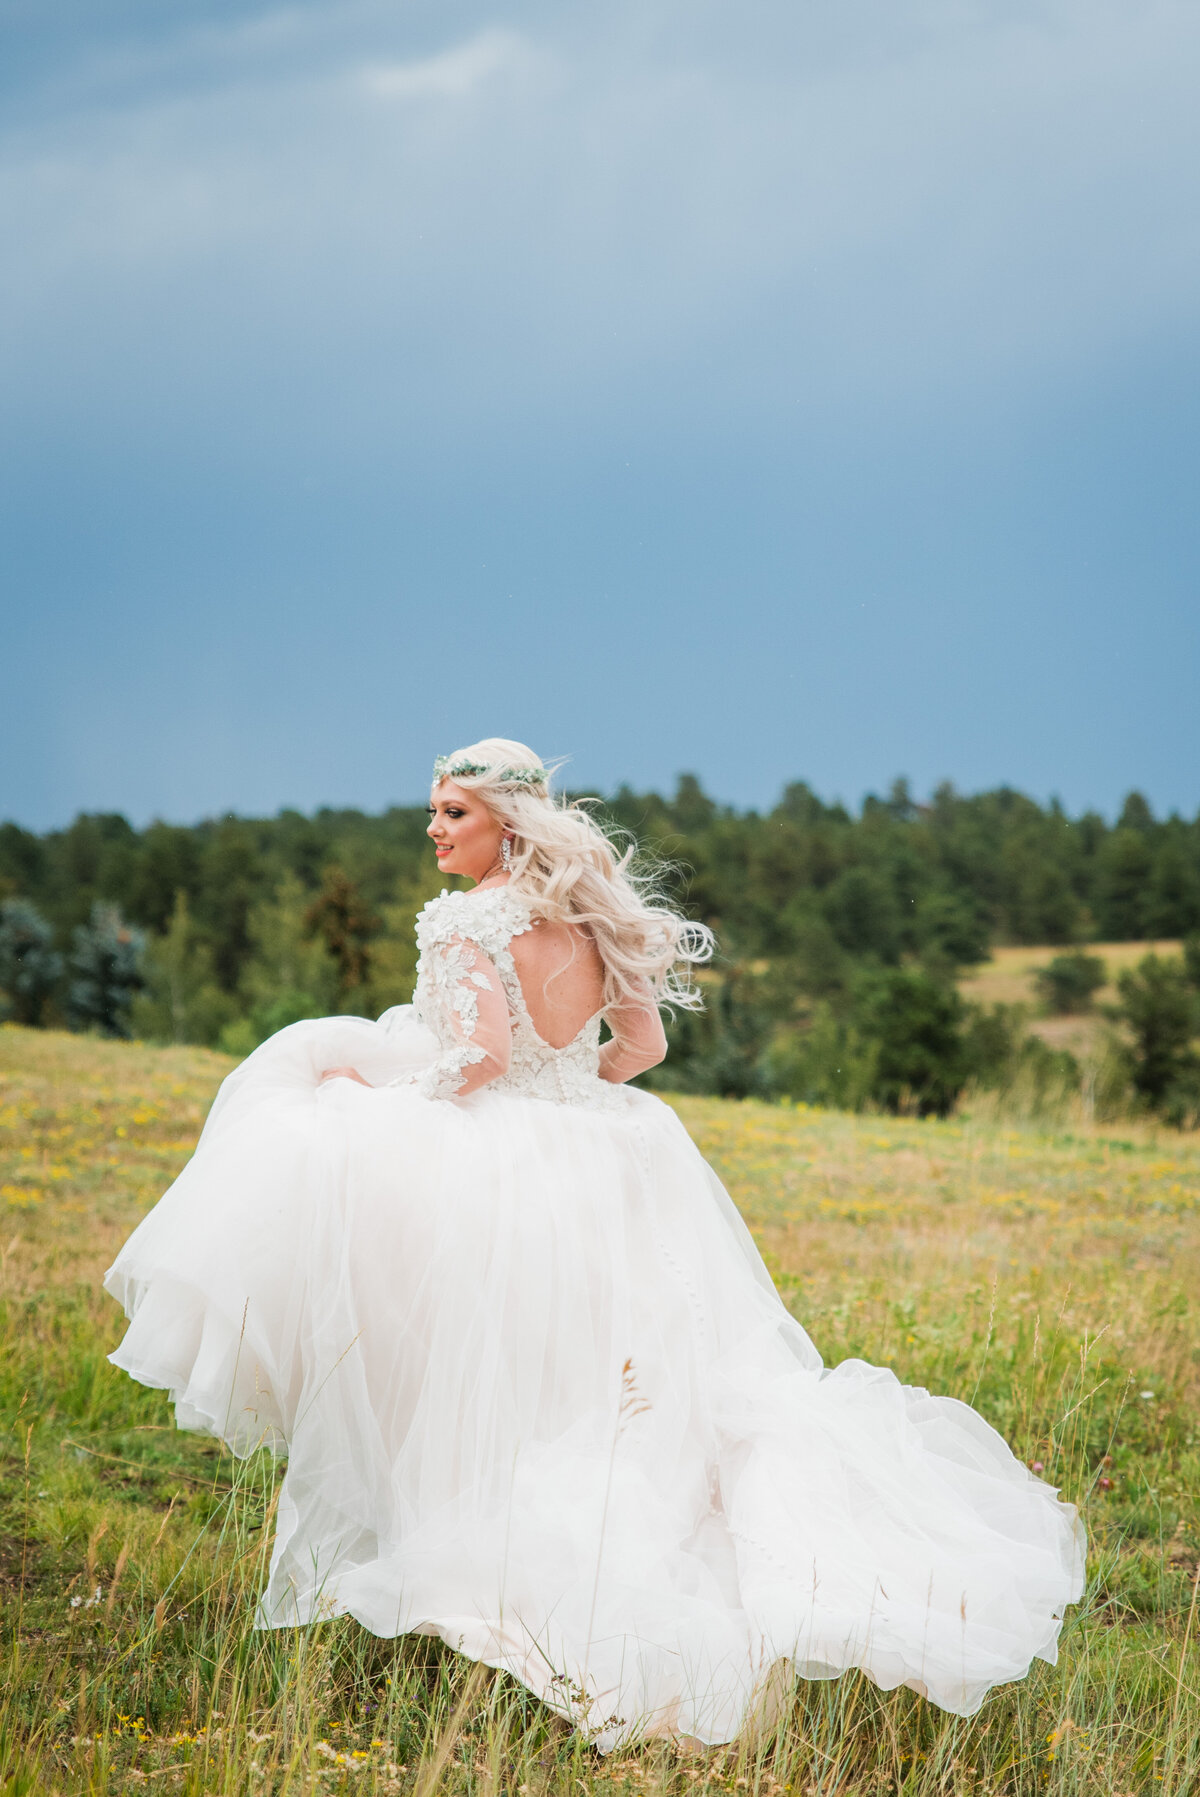 A bride runs away from the camera through a field as she holds the skirt of her dress and her hair blows in the wind.